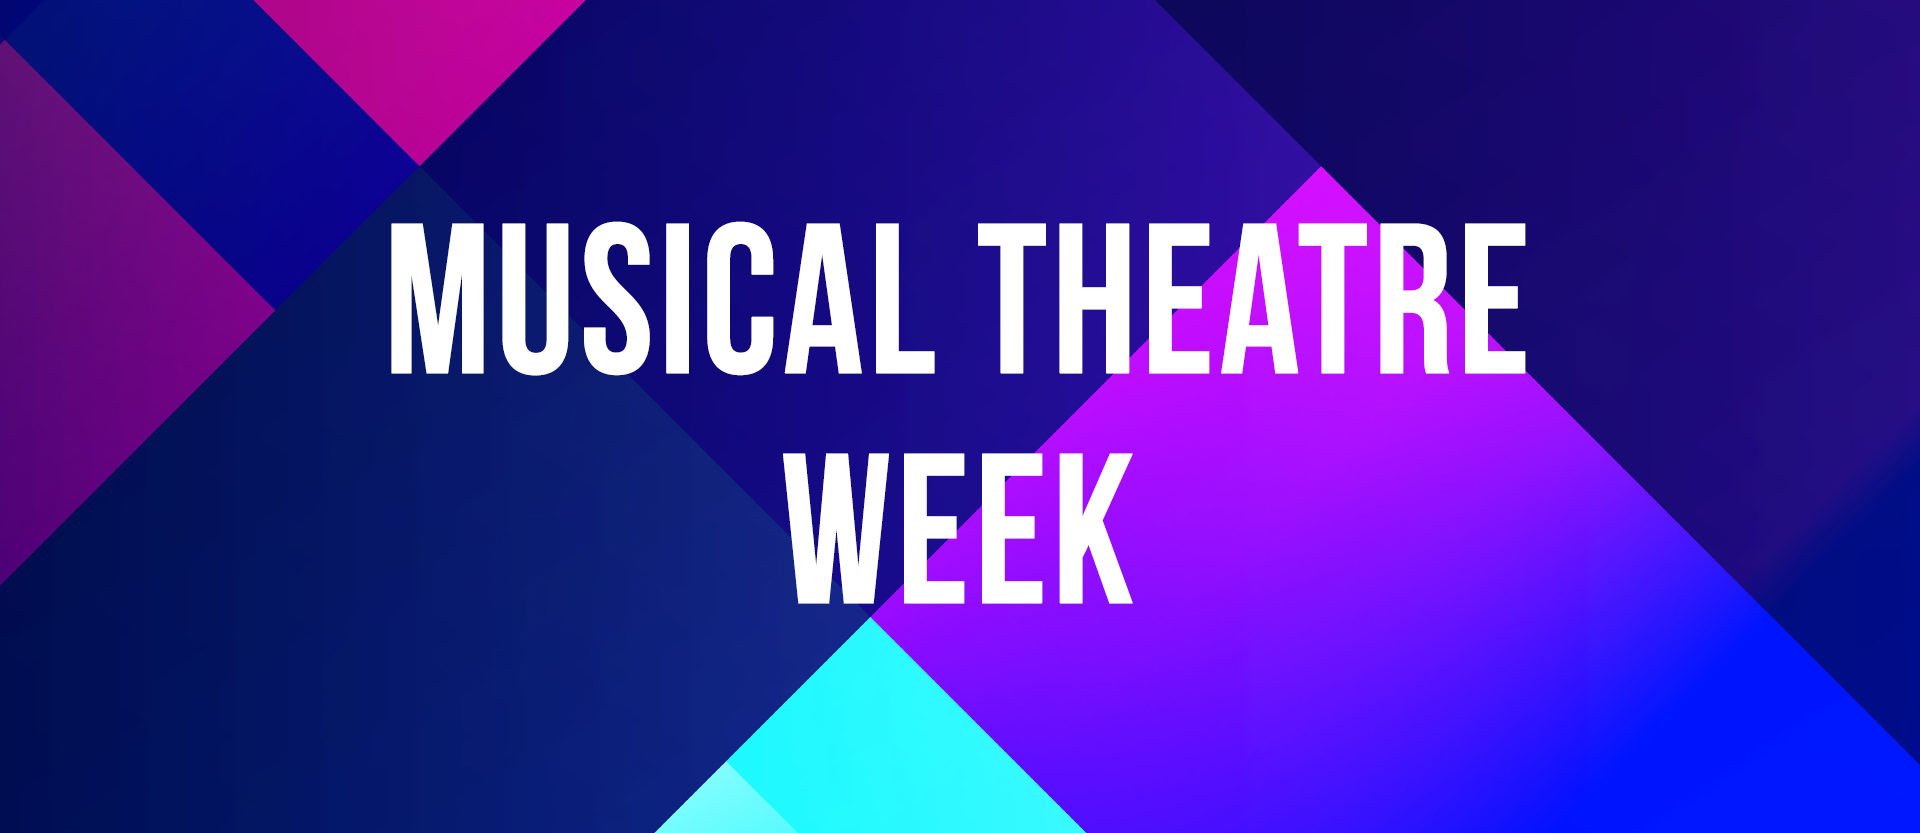 Arts1 Event: Musical Theatre Week